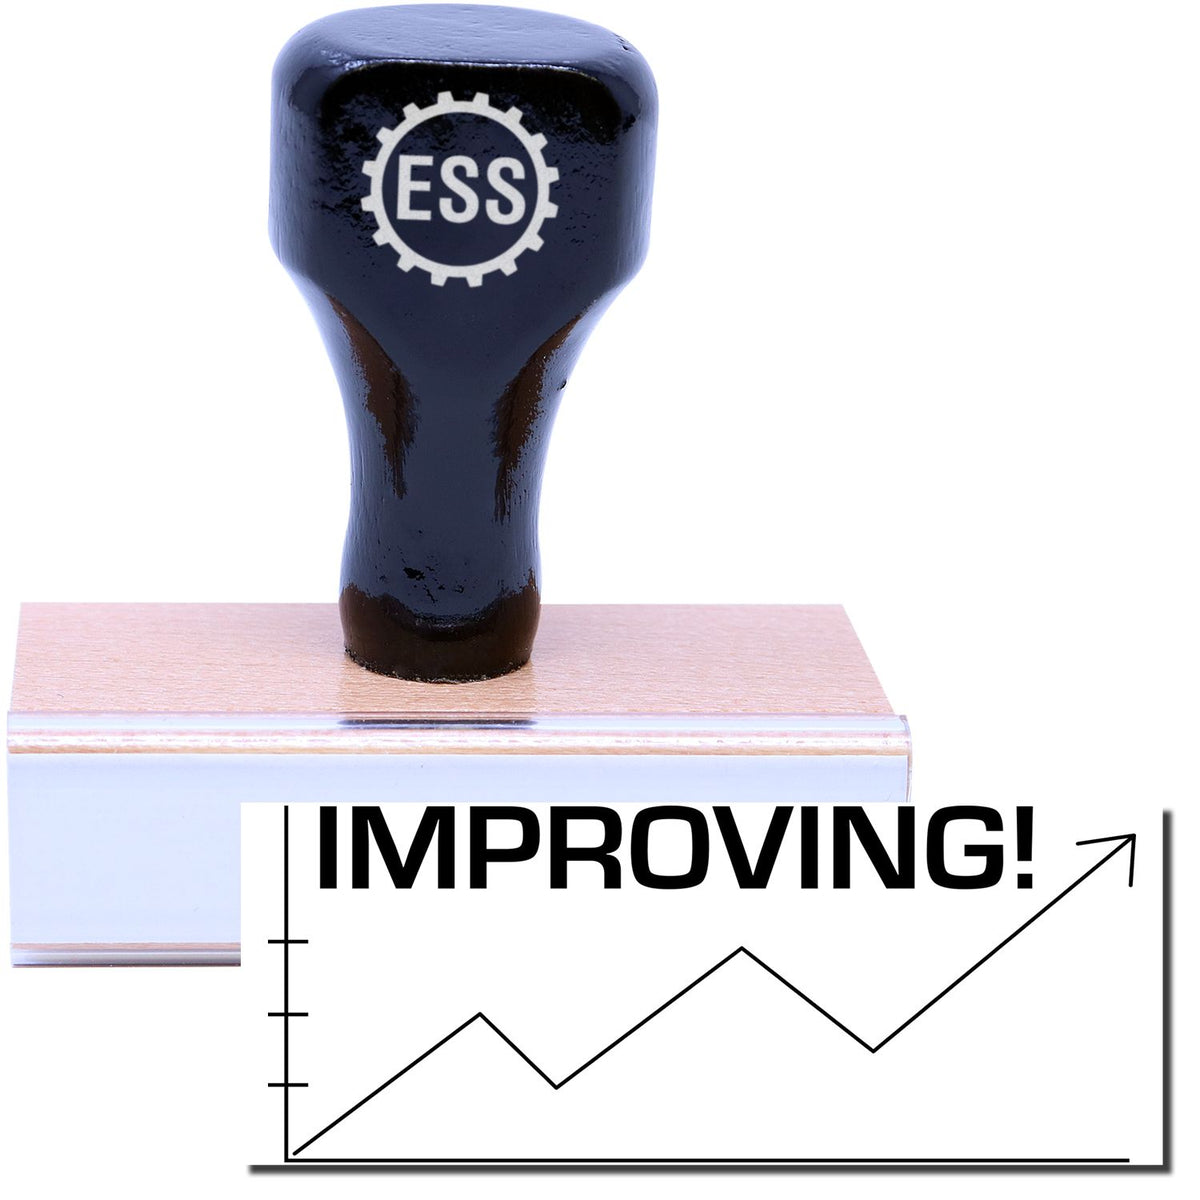 A stock office rubber stamp with a stamped image showing how the text &quot;IMPROVING&quot; with a chart showing an arrow that moves up, down, and back up again is displayed after stamping.